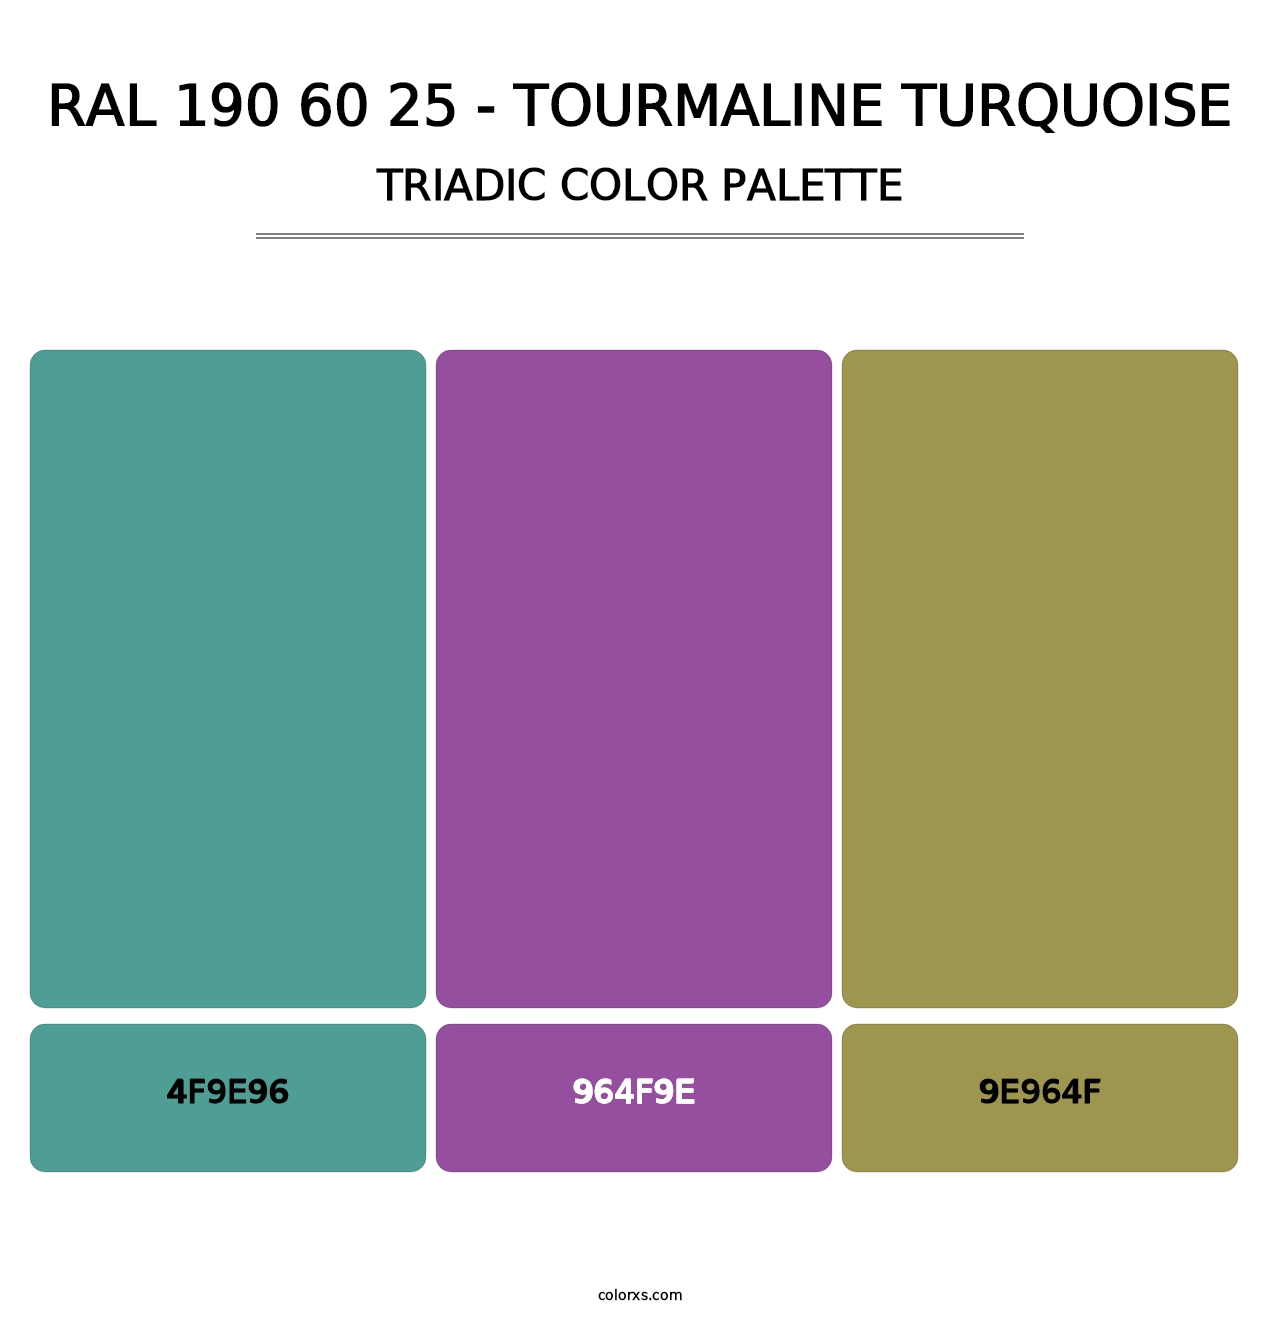 RAL 190 60 25 - Tourmaline Turquoise - Triadic Color Palette